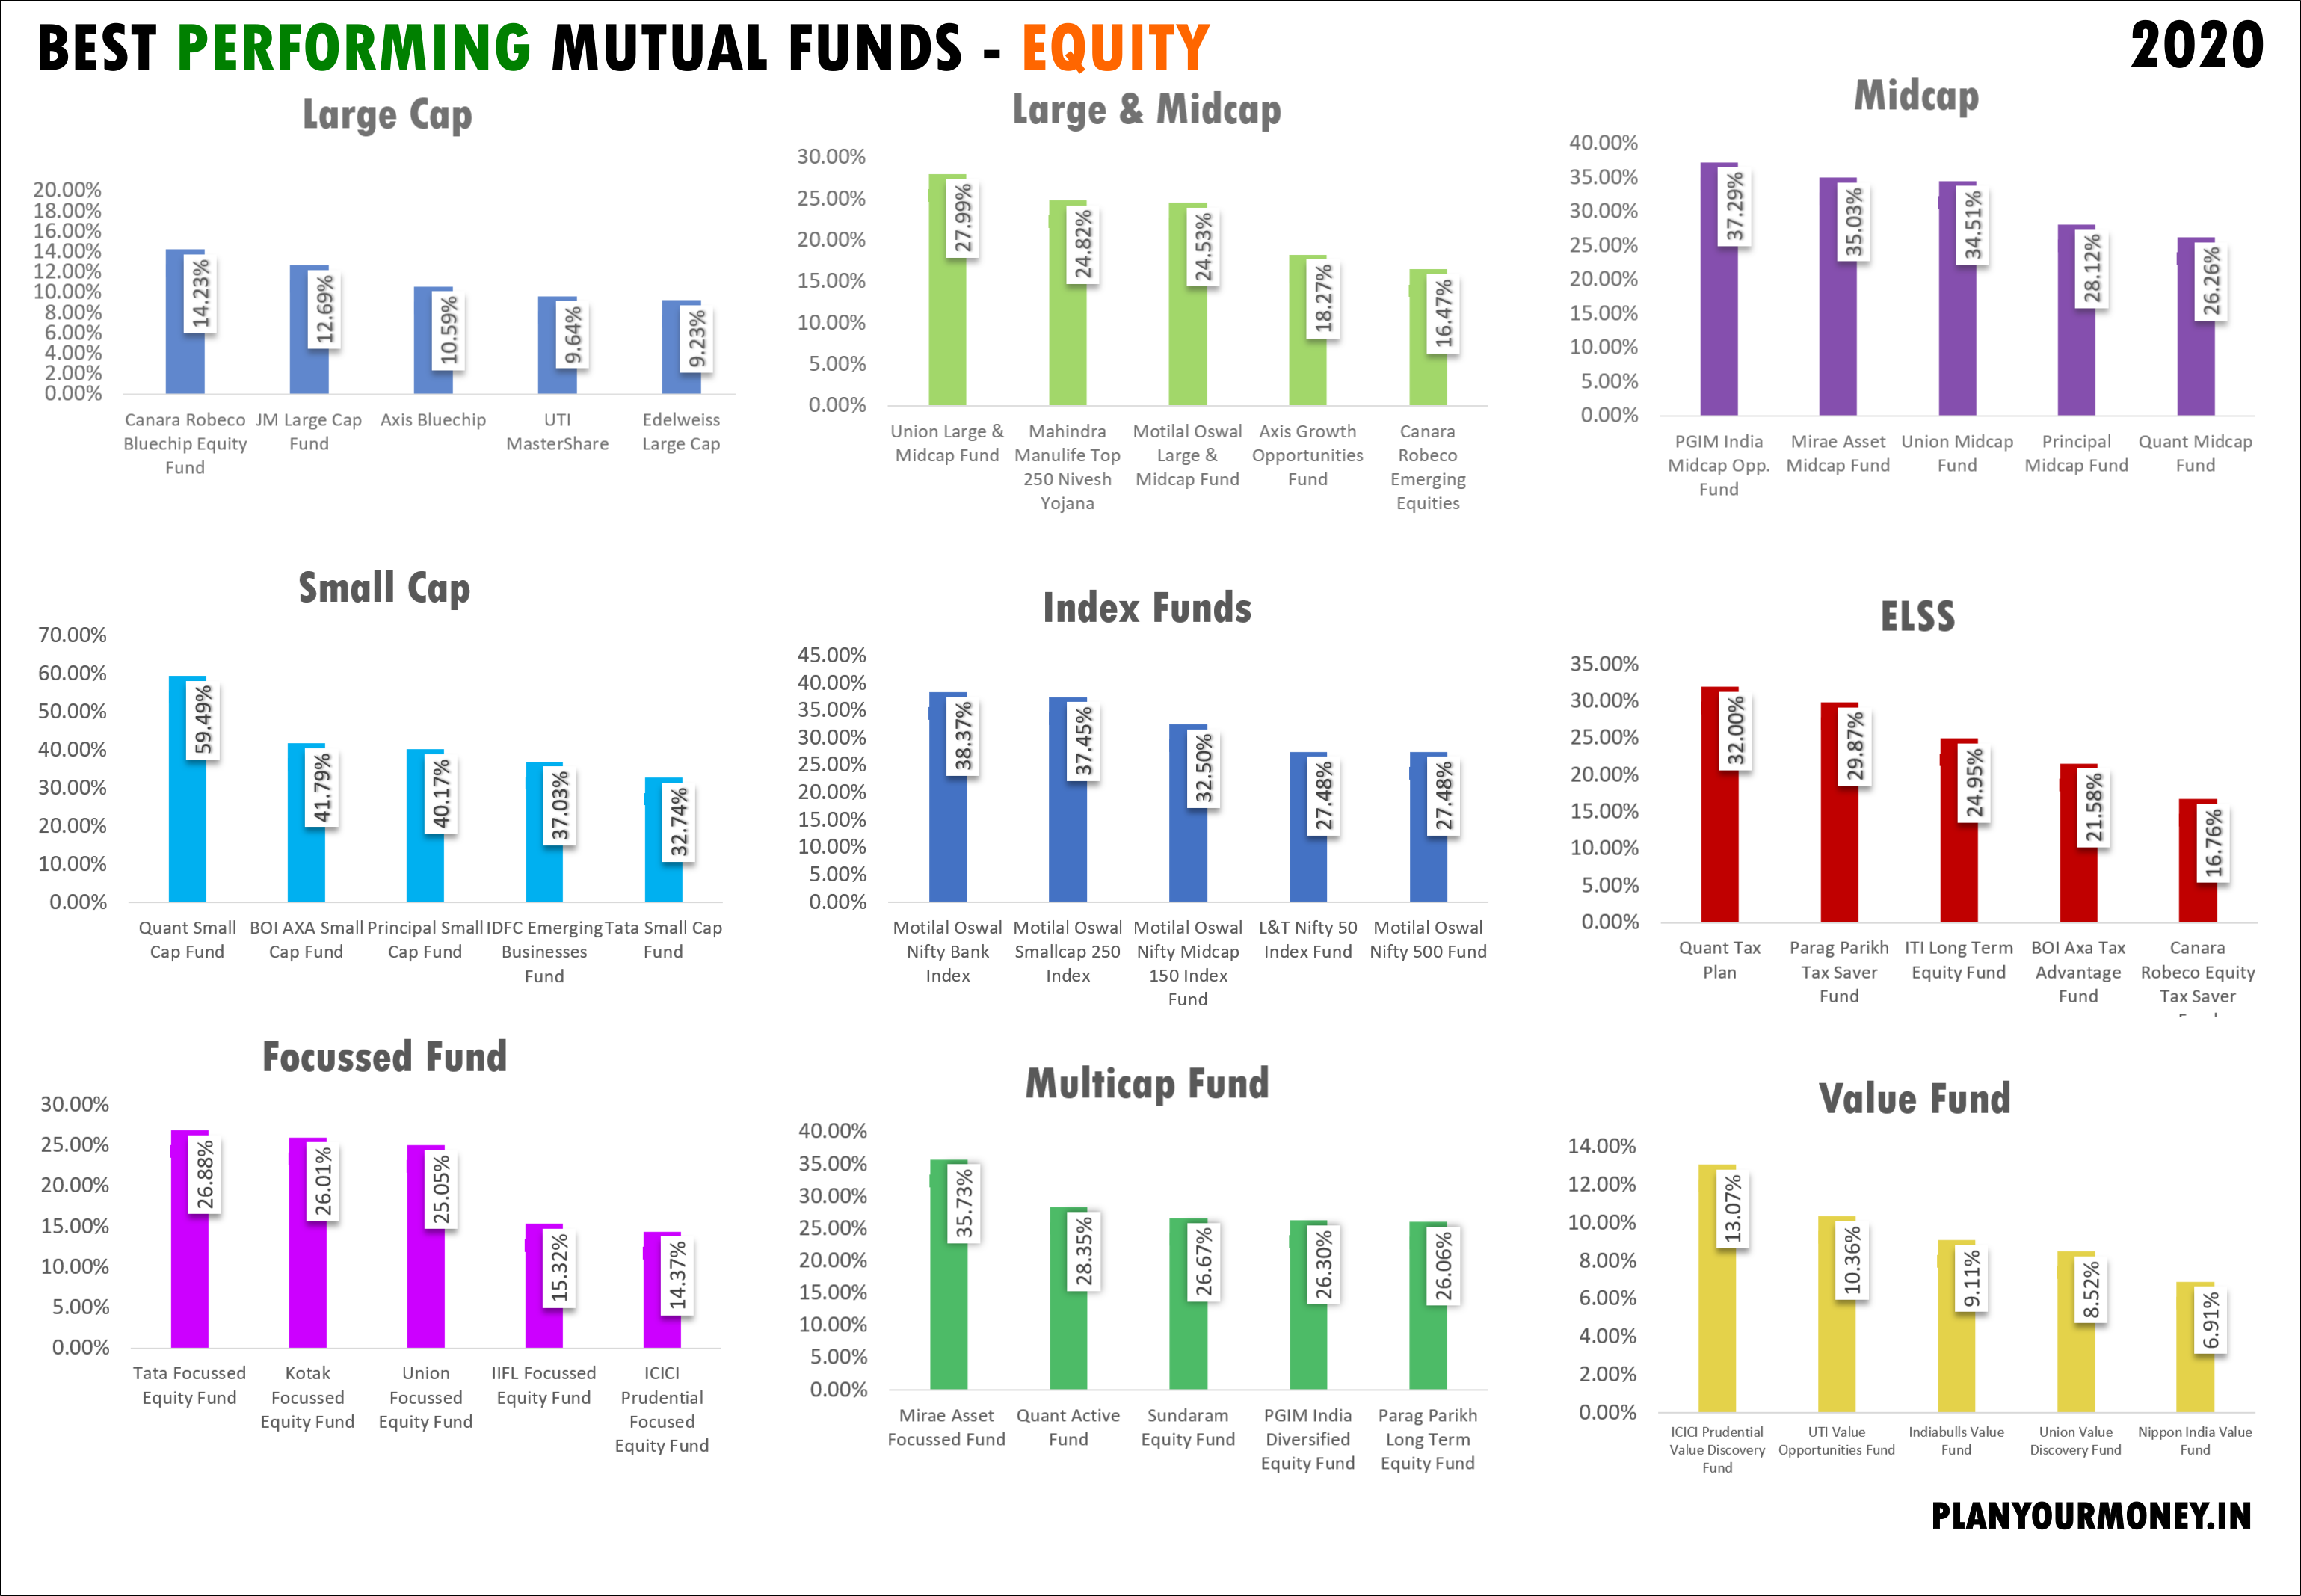 Best performing mutual funds in 2020